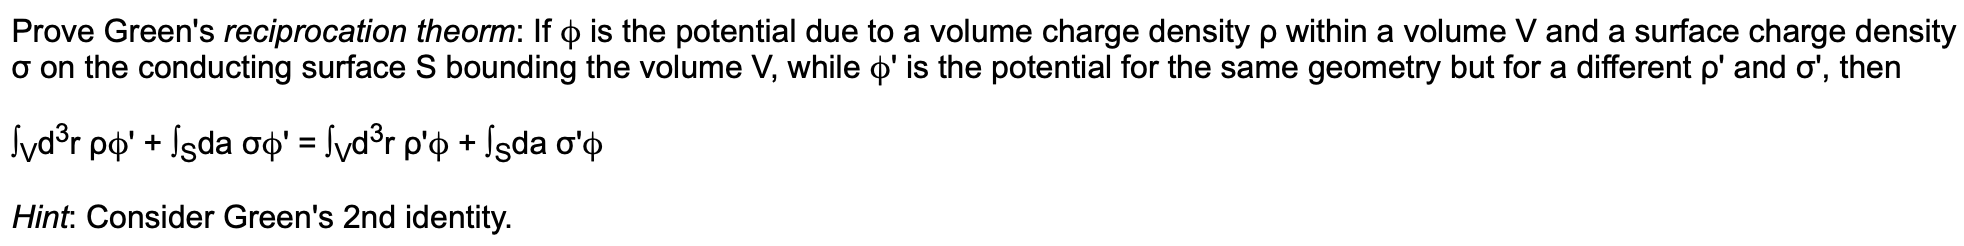 Prove Green's reciprocation theorm: If p is the potential due to a volume charge density p within a volume V and a surface charge density
a on the conducting surface S bounding the volume V, while ' is the potential for the same geometry but for a different p' and o', then
vdsr ppIsda op' = /vd°r p'p + fsda o'p
Hint: Consider Green's 2nd identity.
